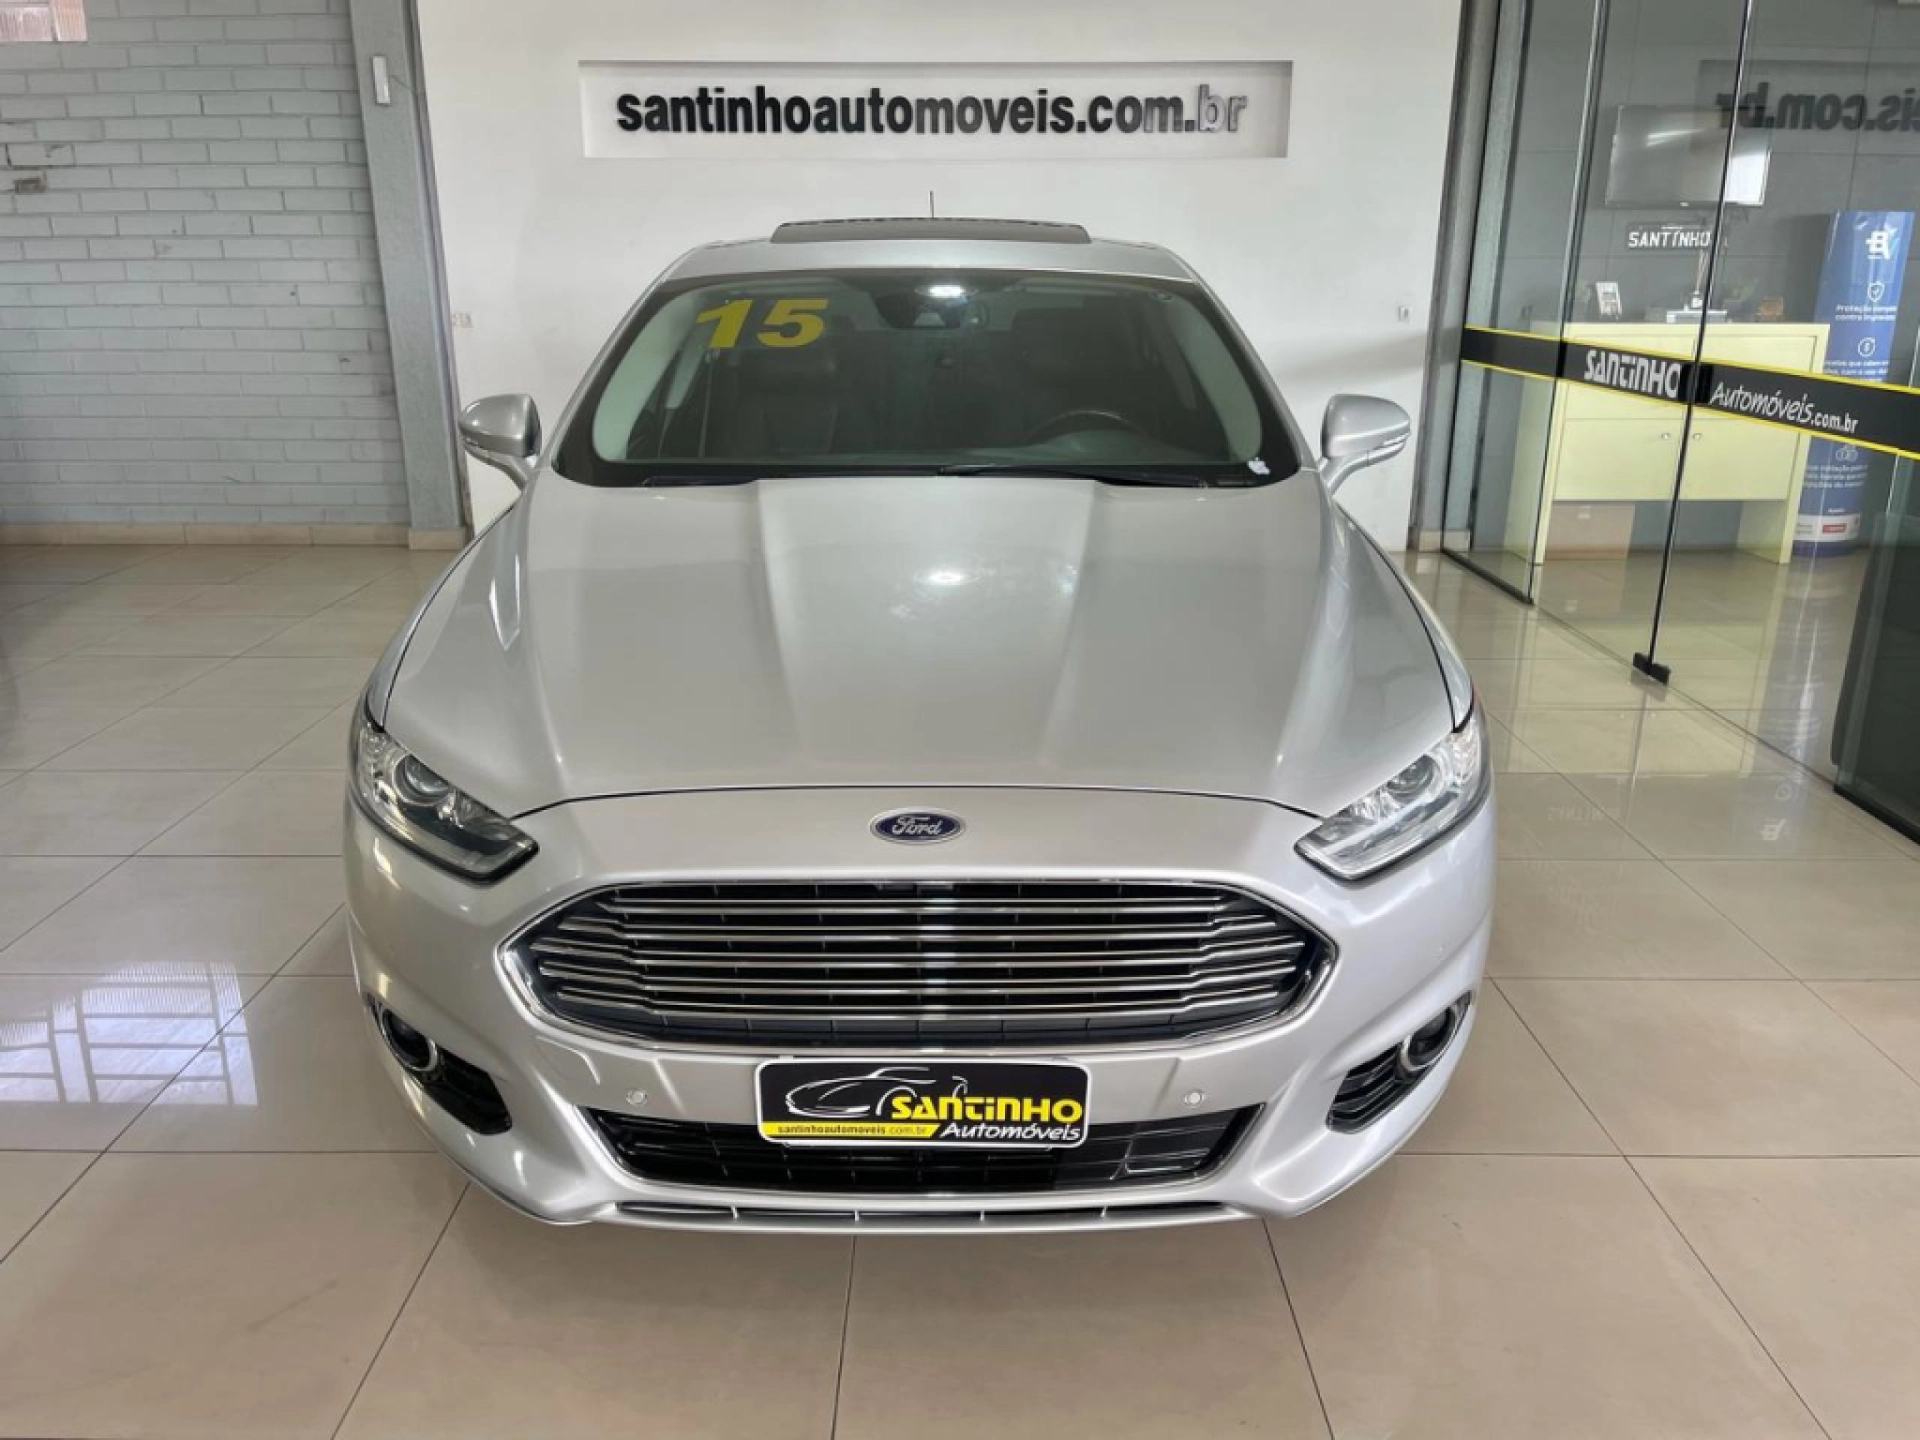 Ford Fusion  2015